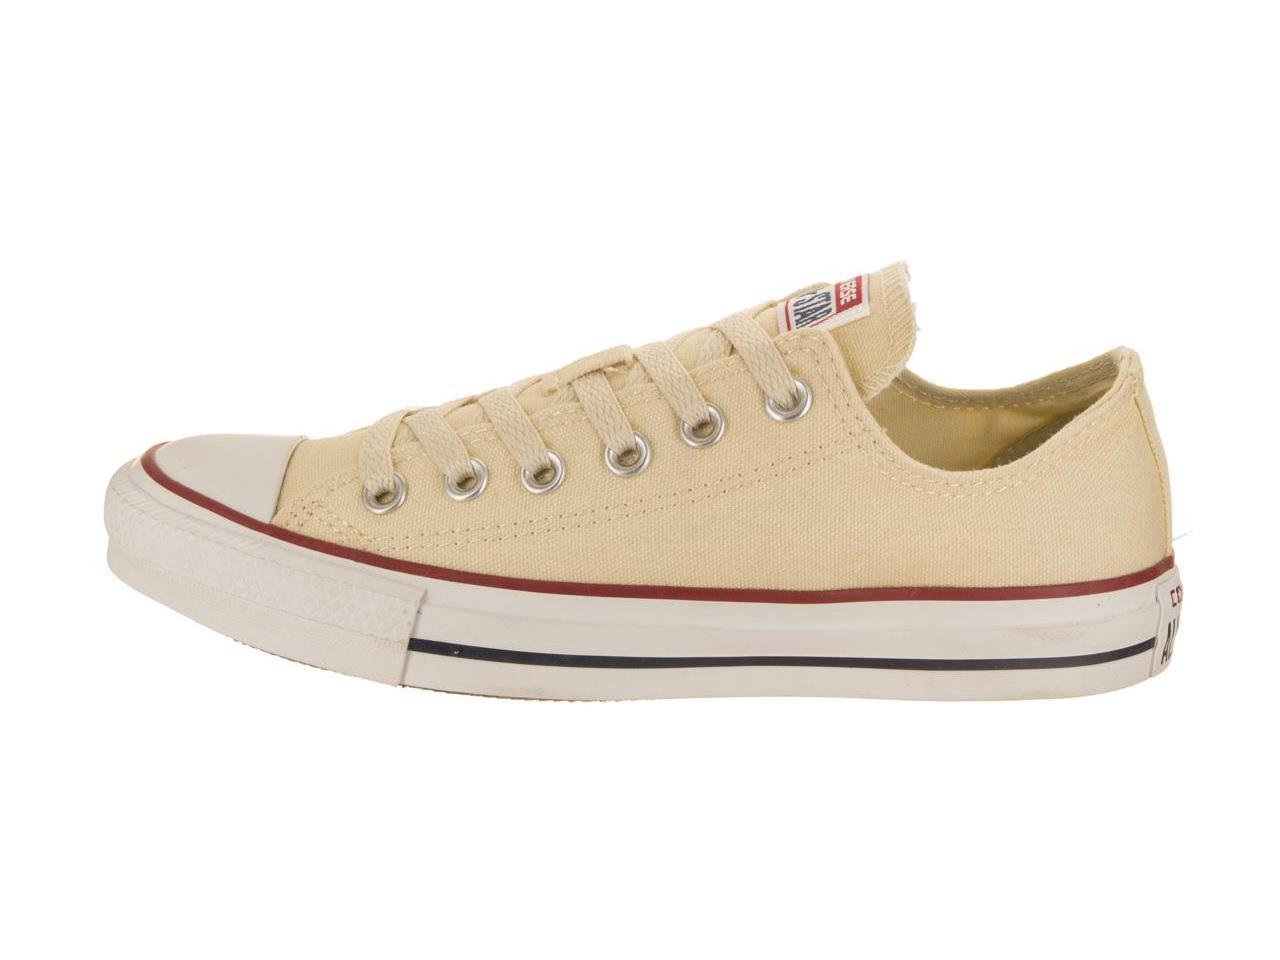 Converse Chuck Taylor All Star Ox Men US 7.5 Ivory Sneakers - Newegg.com